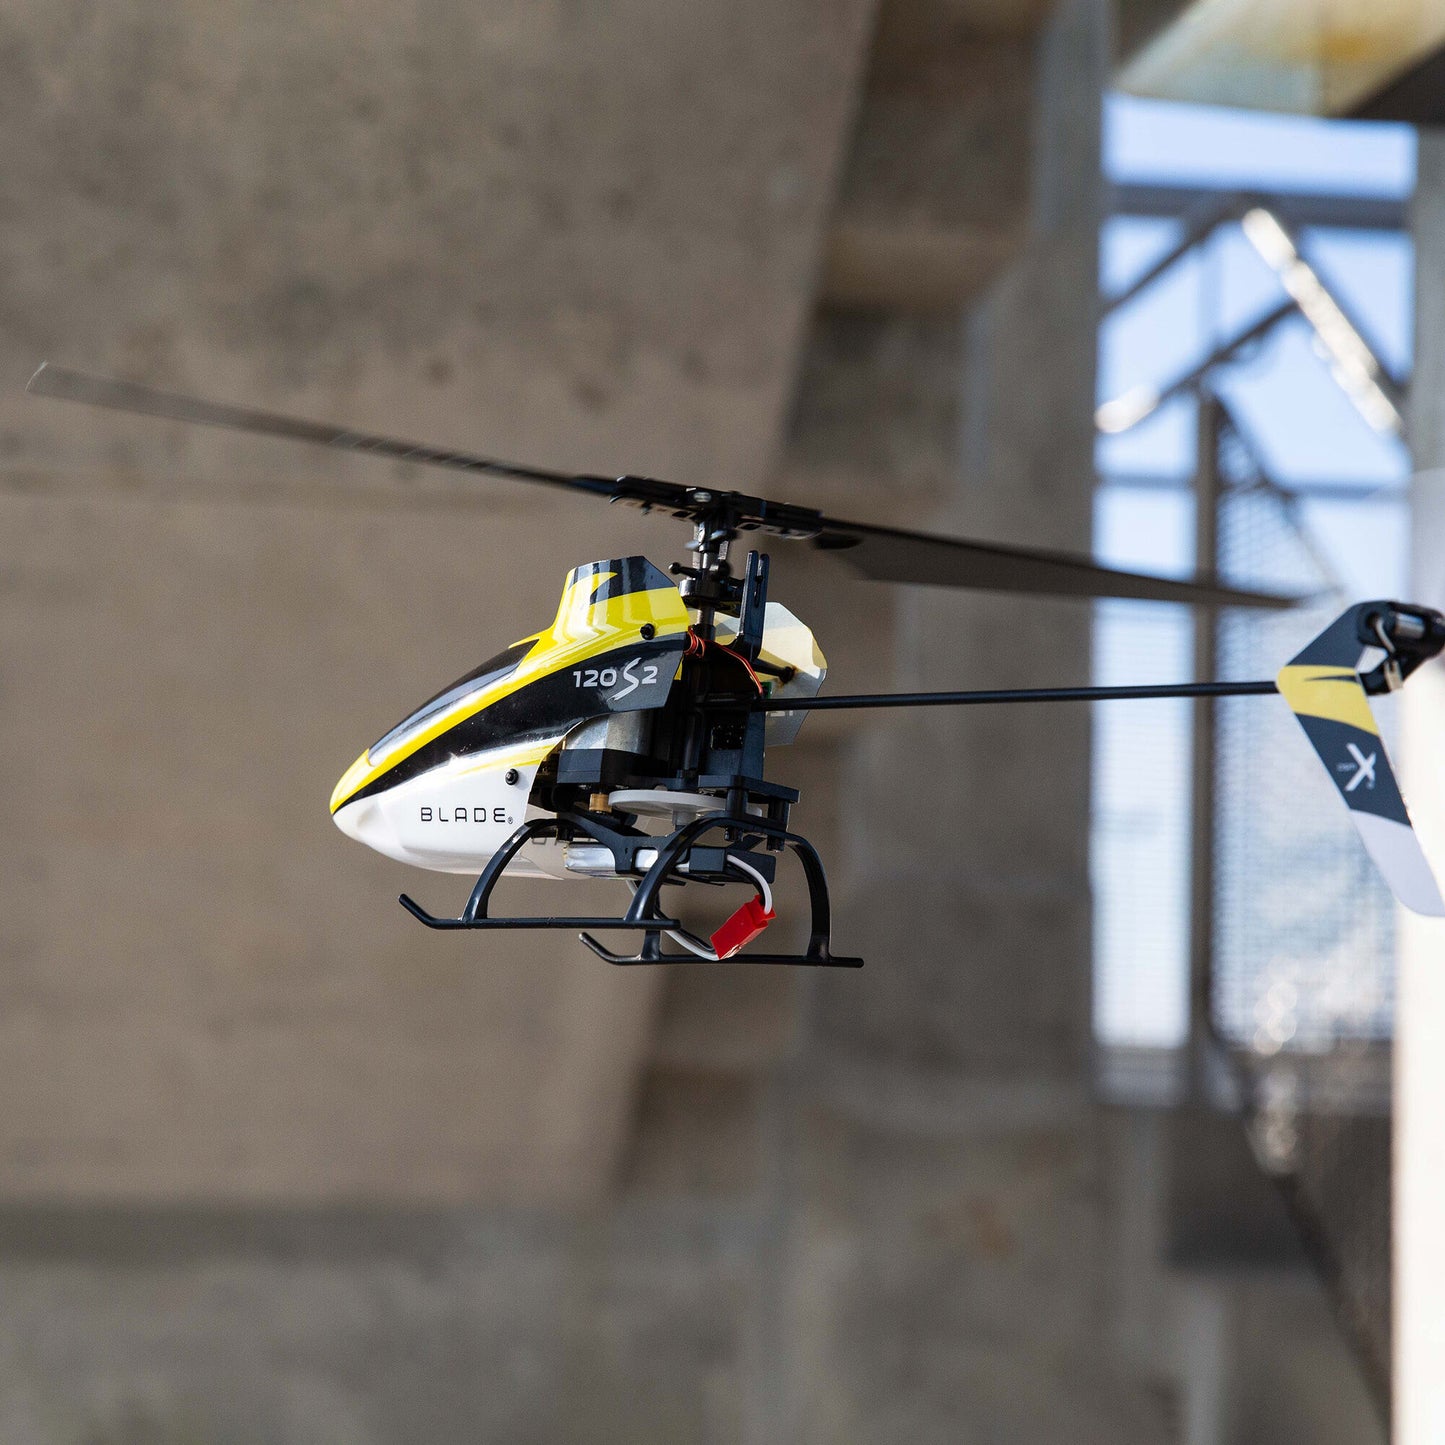 Blade 120 S2 Ready To Fly with SAFE Technology